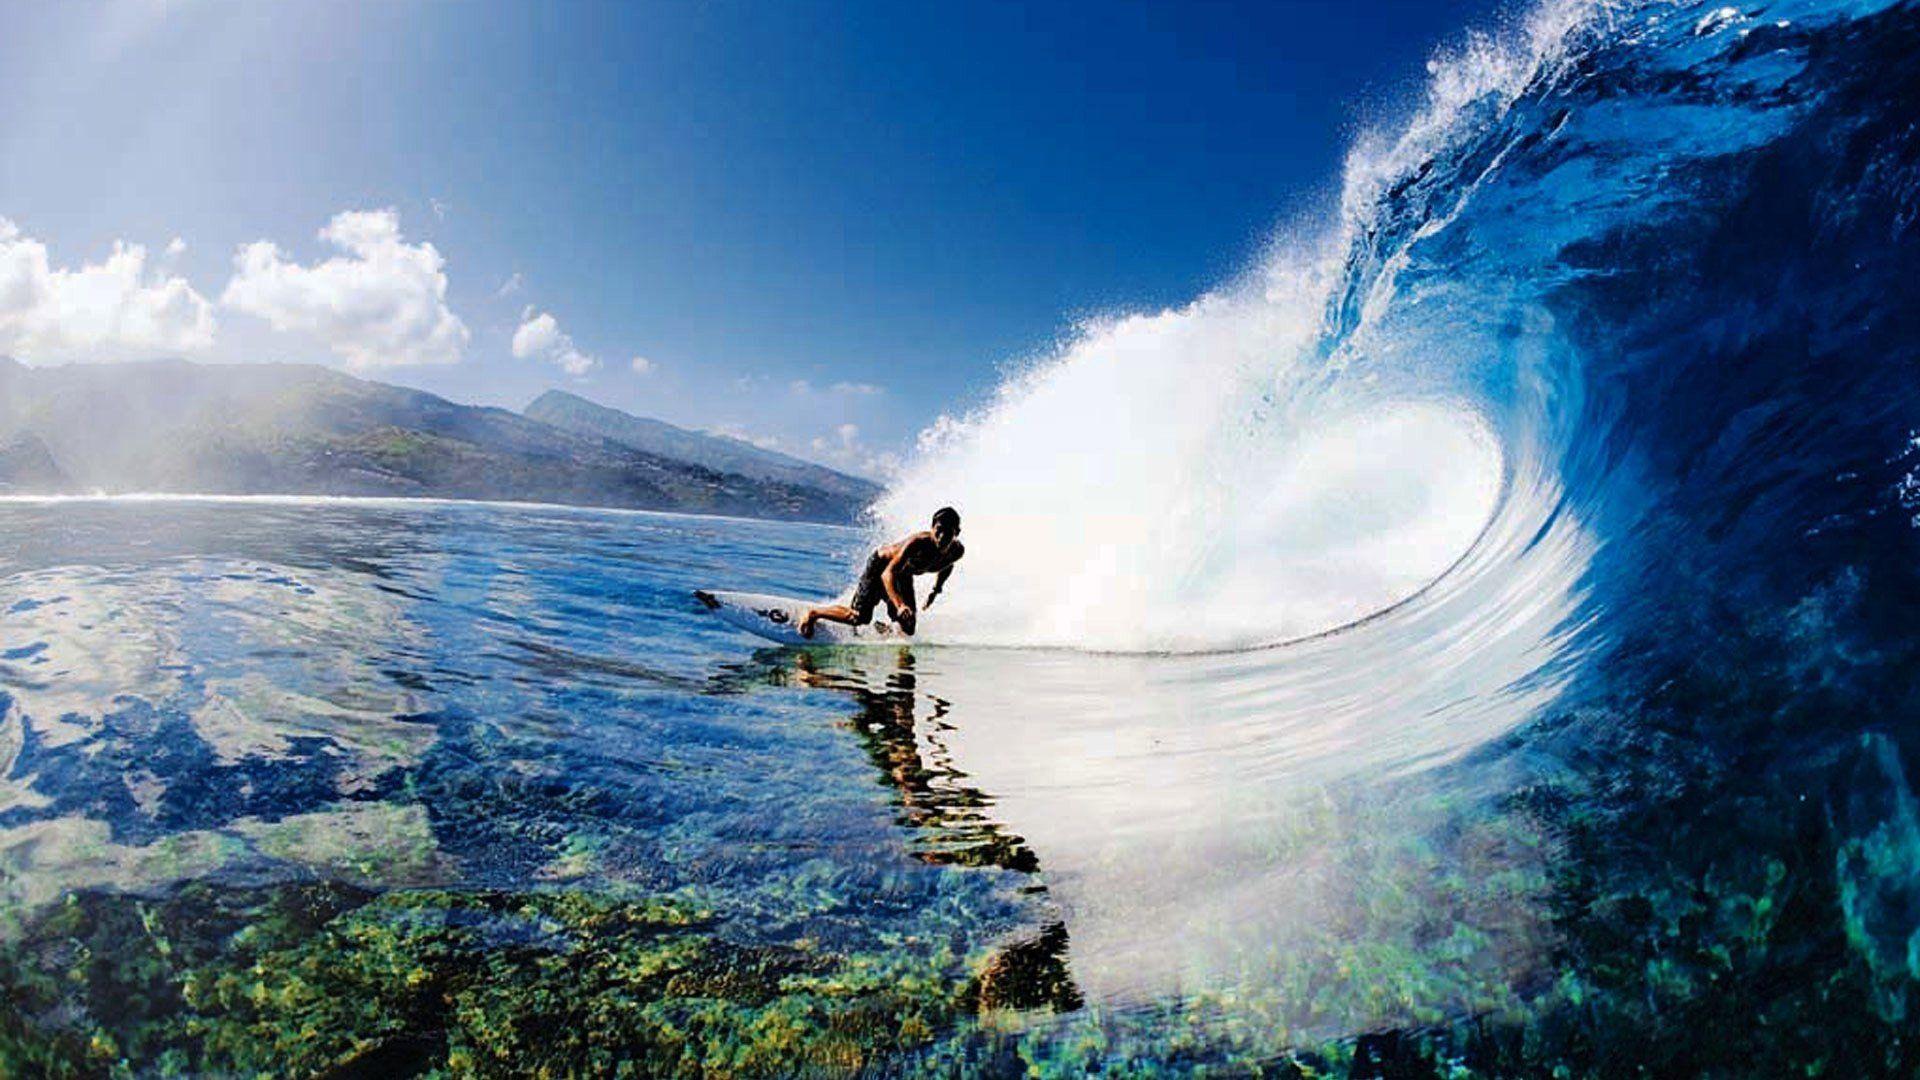 Surfing HD Wallpaper and Background Image